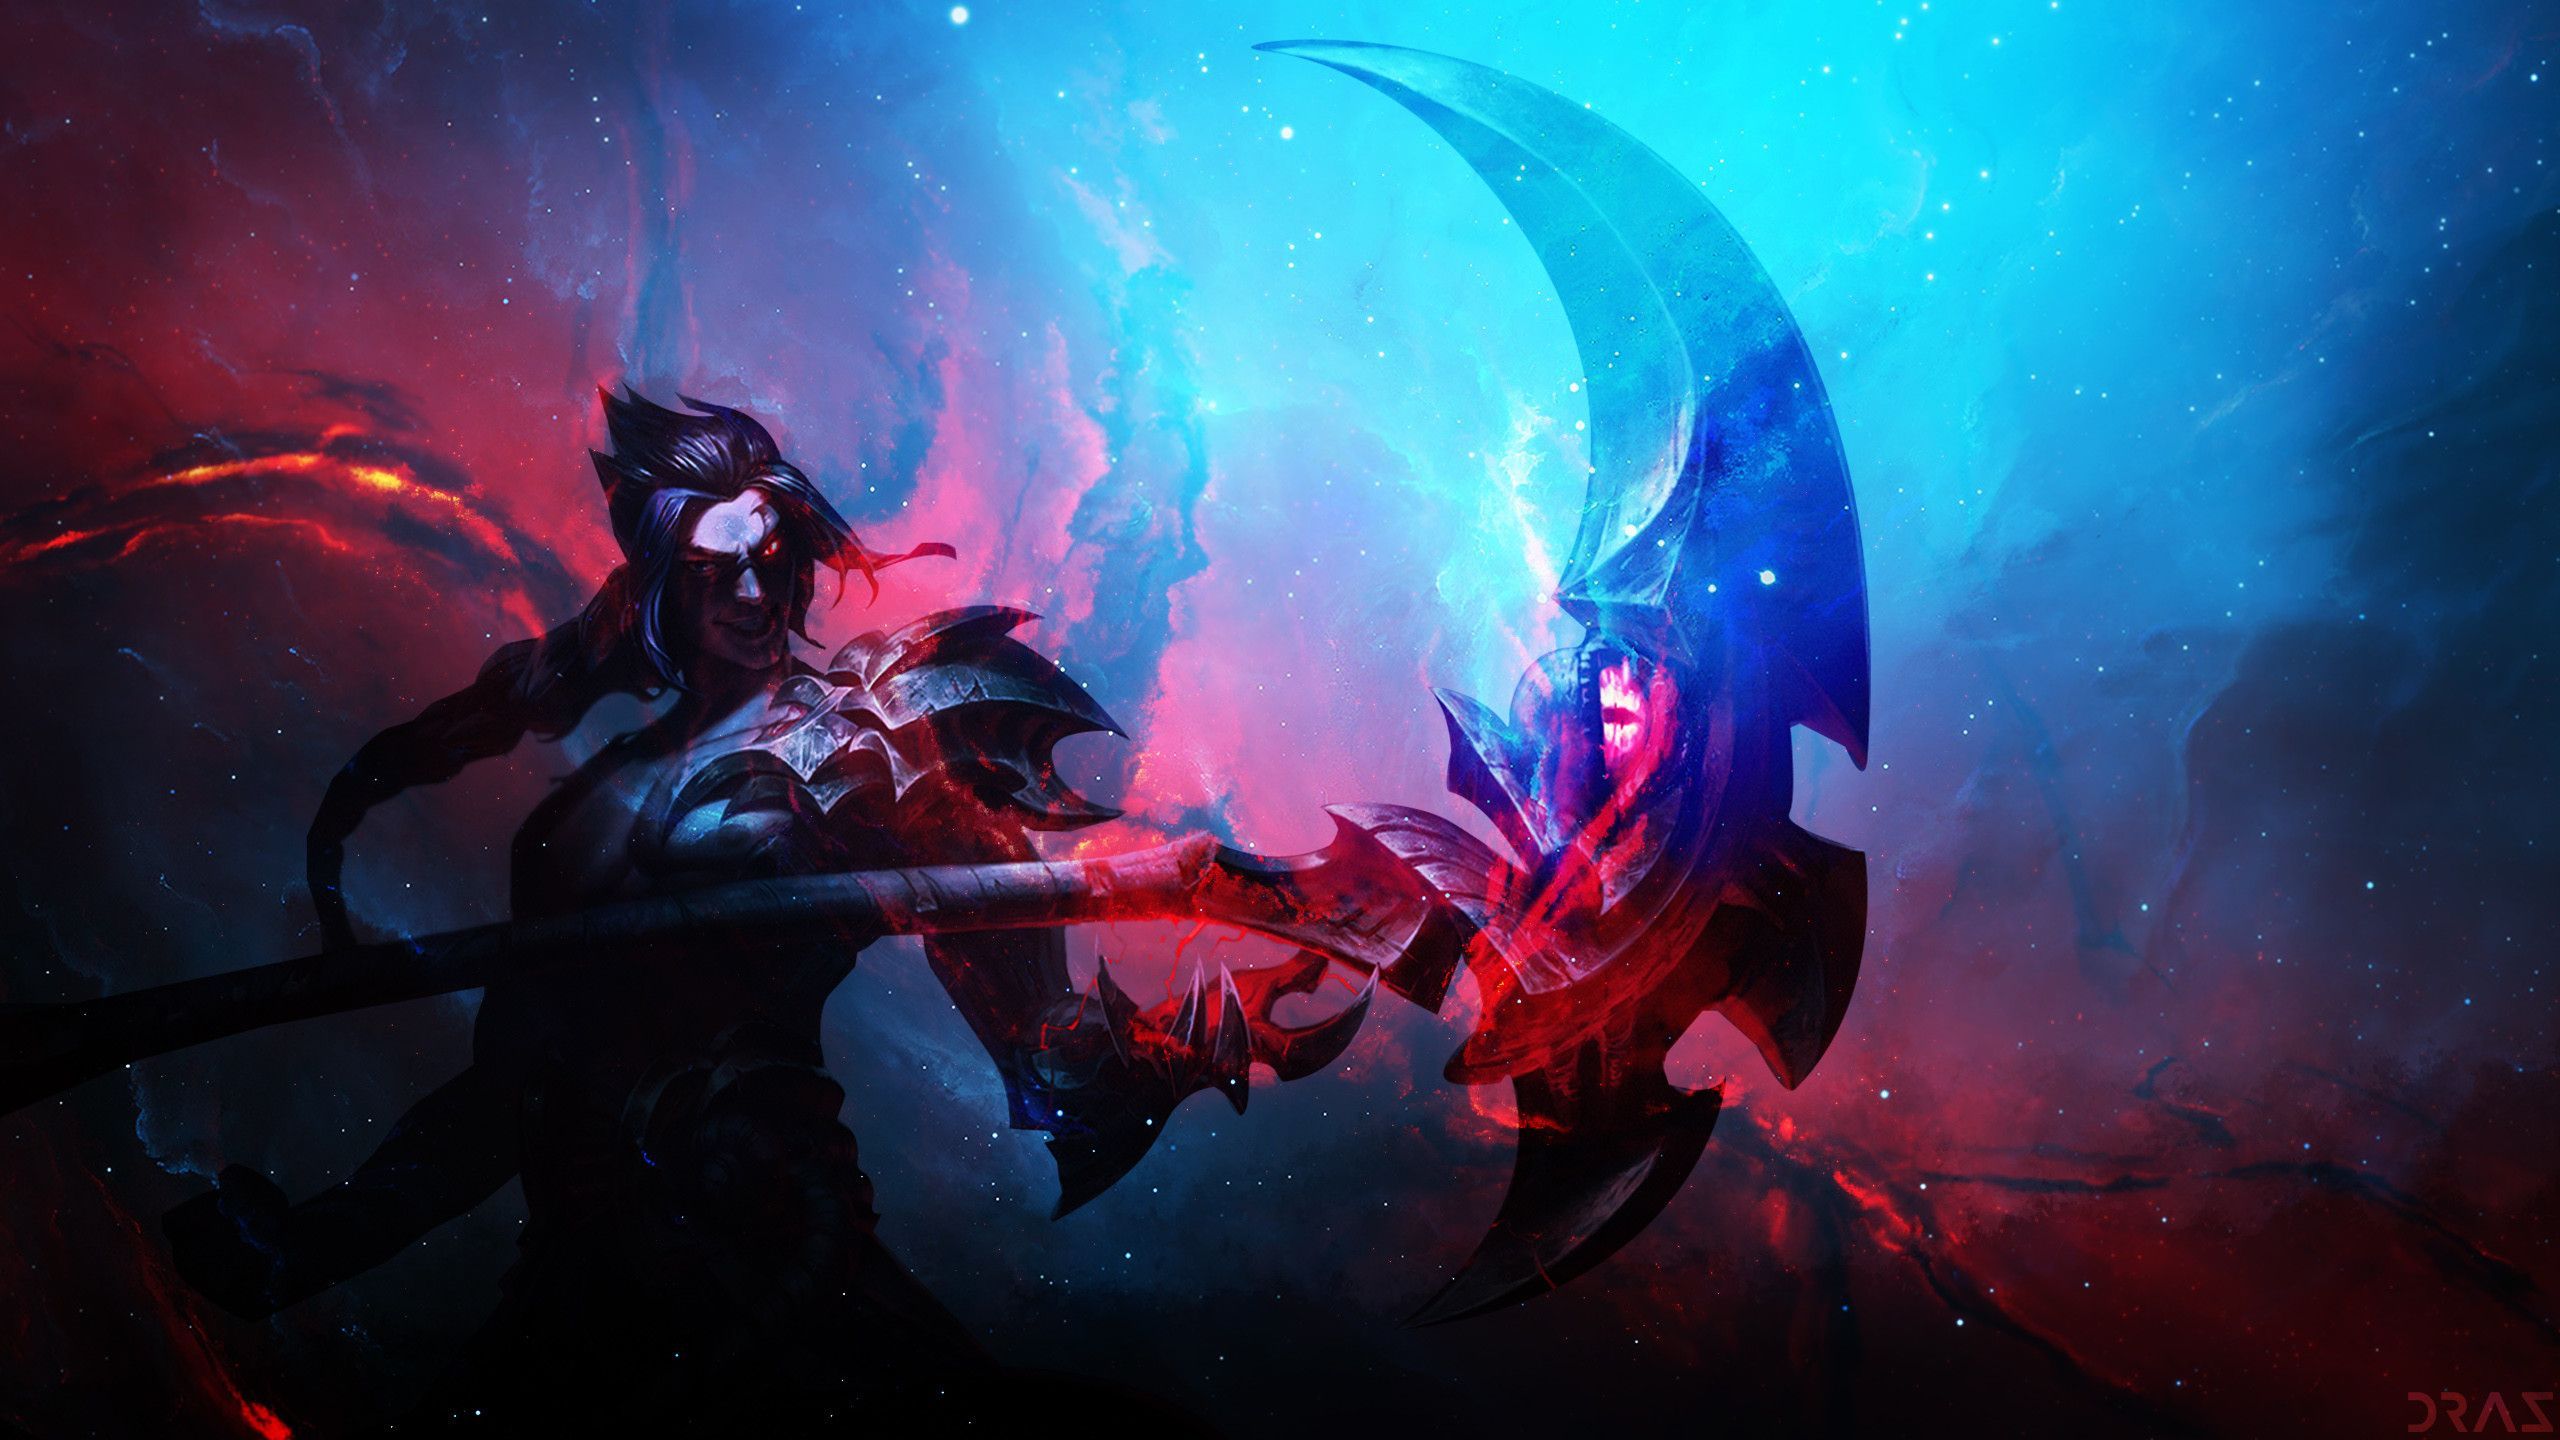 New Snowmoon Kayn for Wallpaper Engine users  rKaynMains